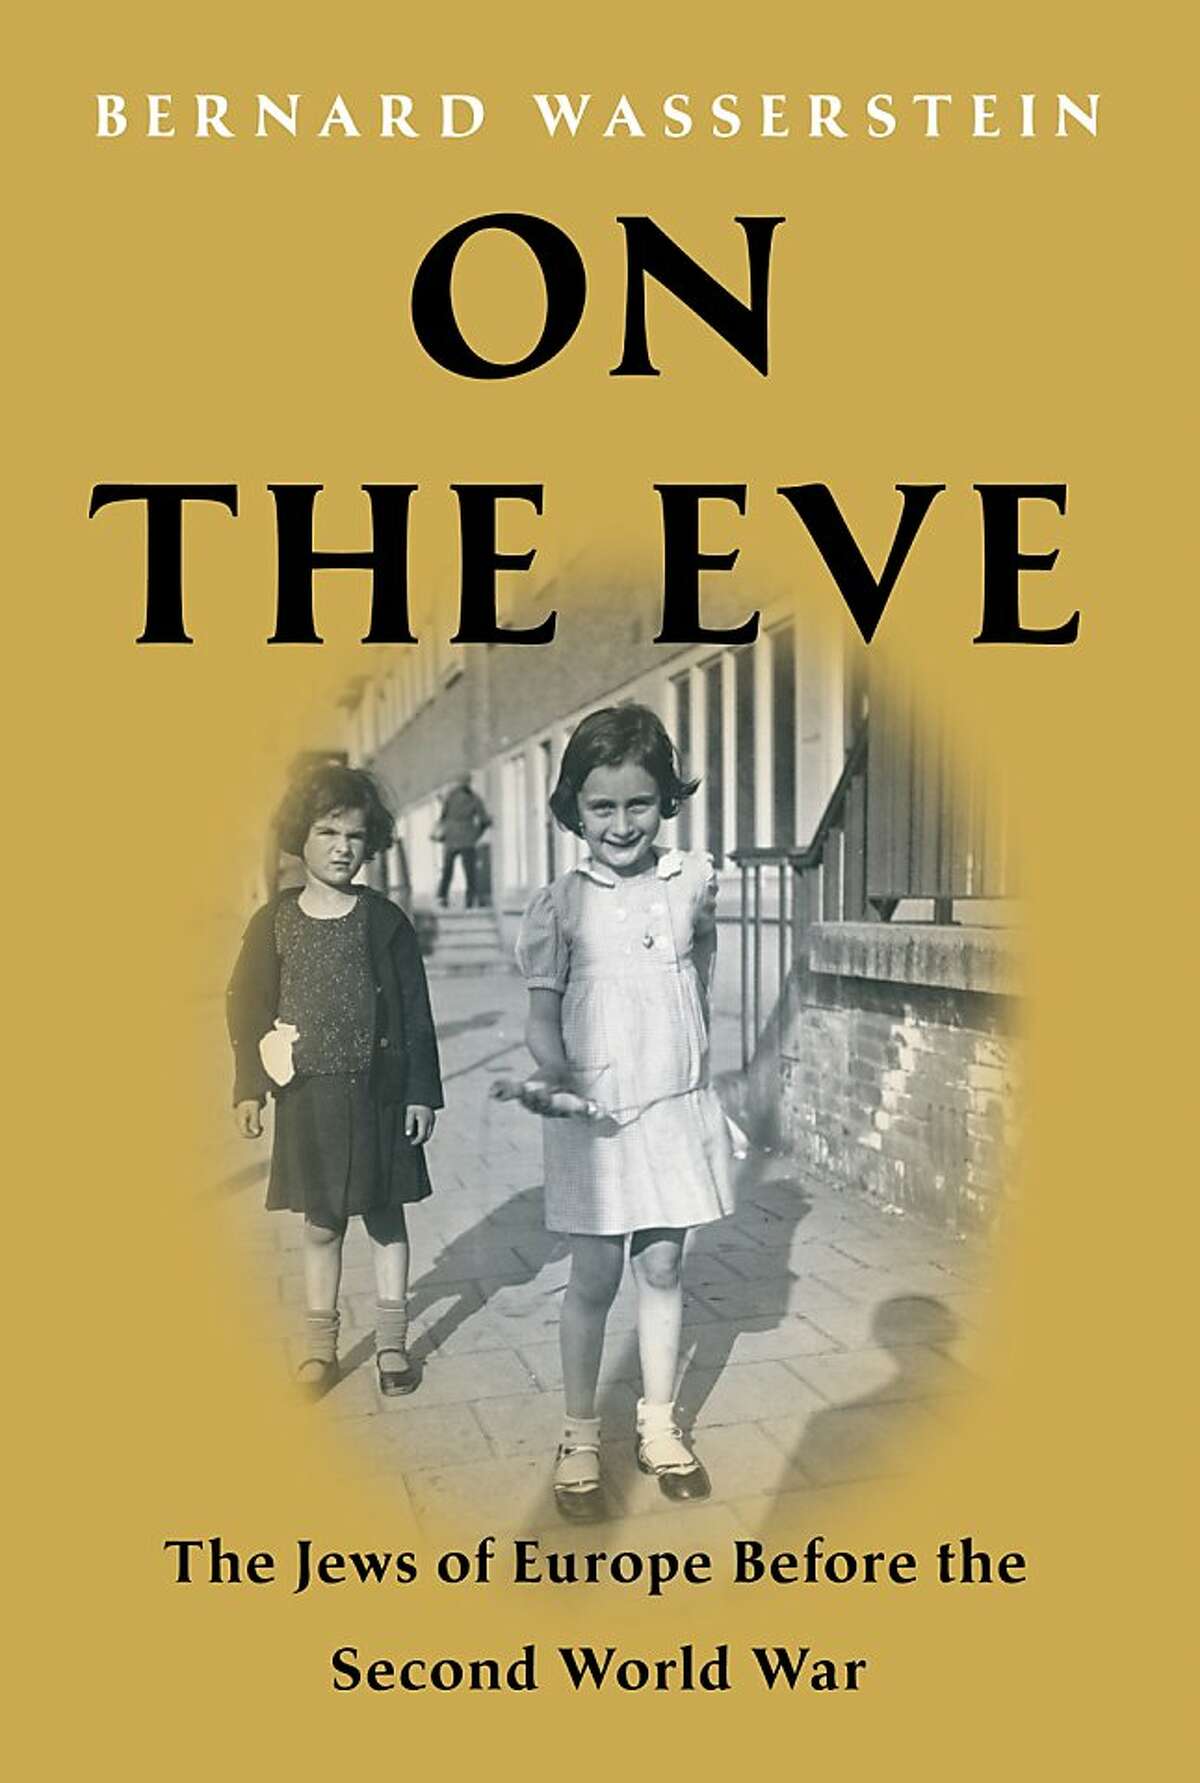 "On the Eve: The Jews of Europe Before the Second World War" by Bernard Wasserstein